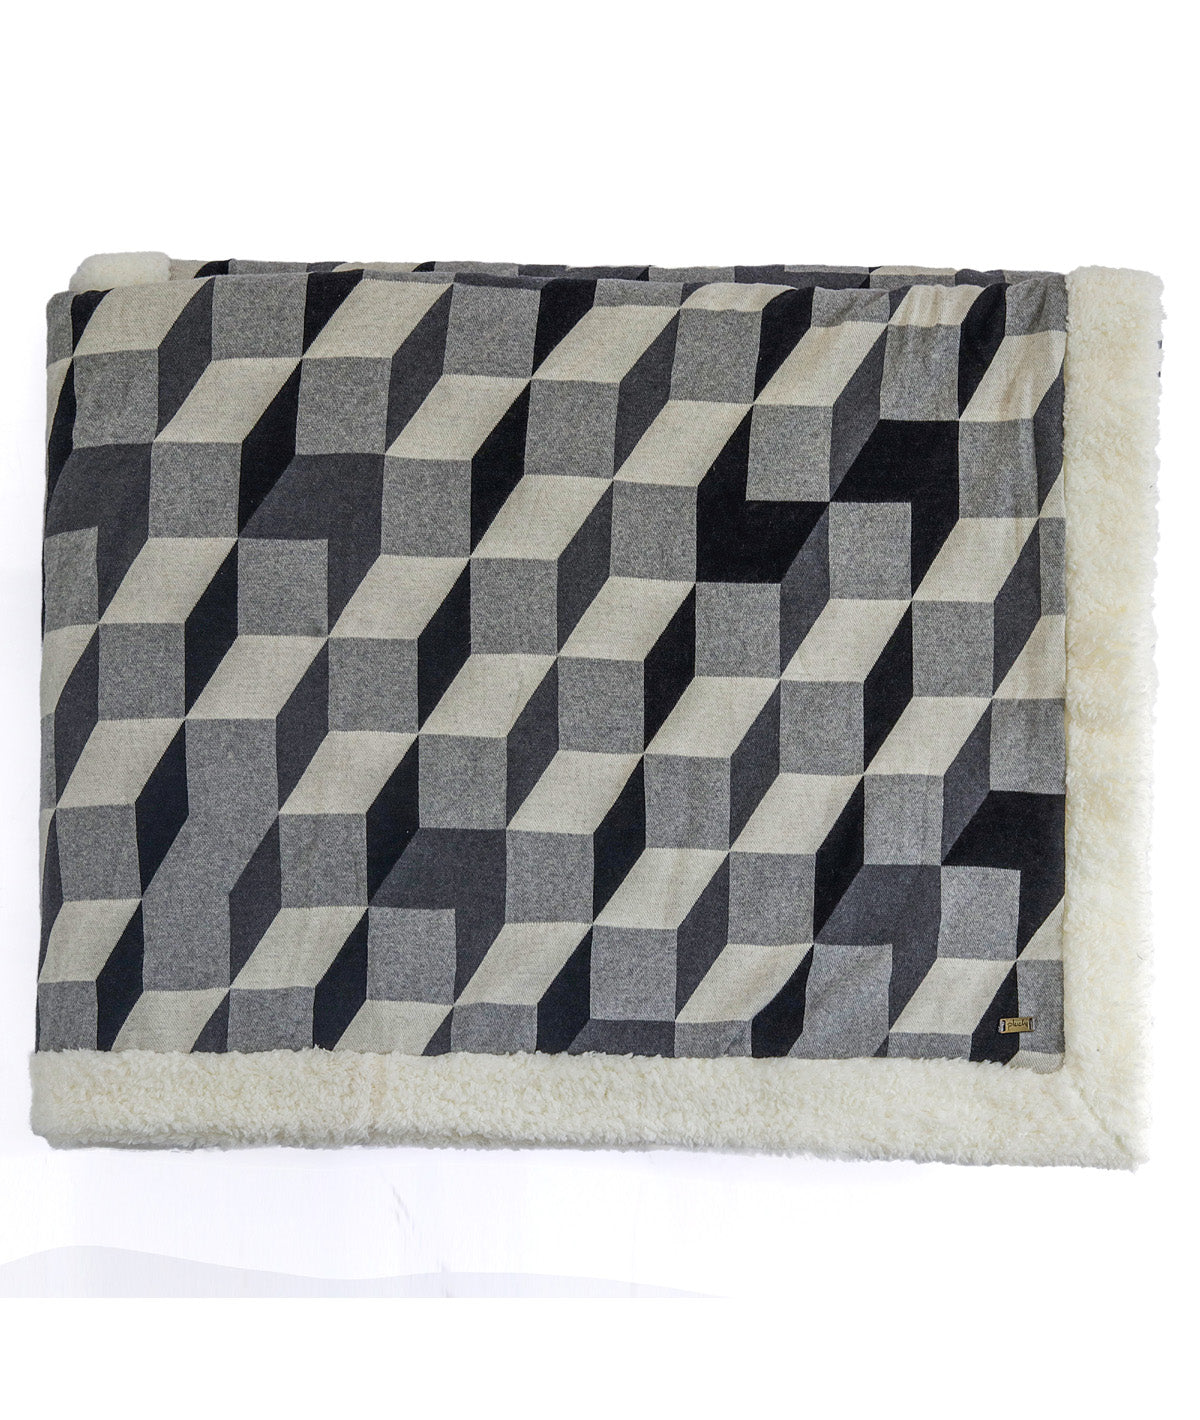 3D Block Double Bed Front Cotton Knitted with Sherpa Back Blanket with Ivory ,Dark Grey, Light. Grey & Black